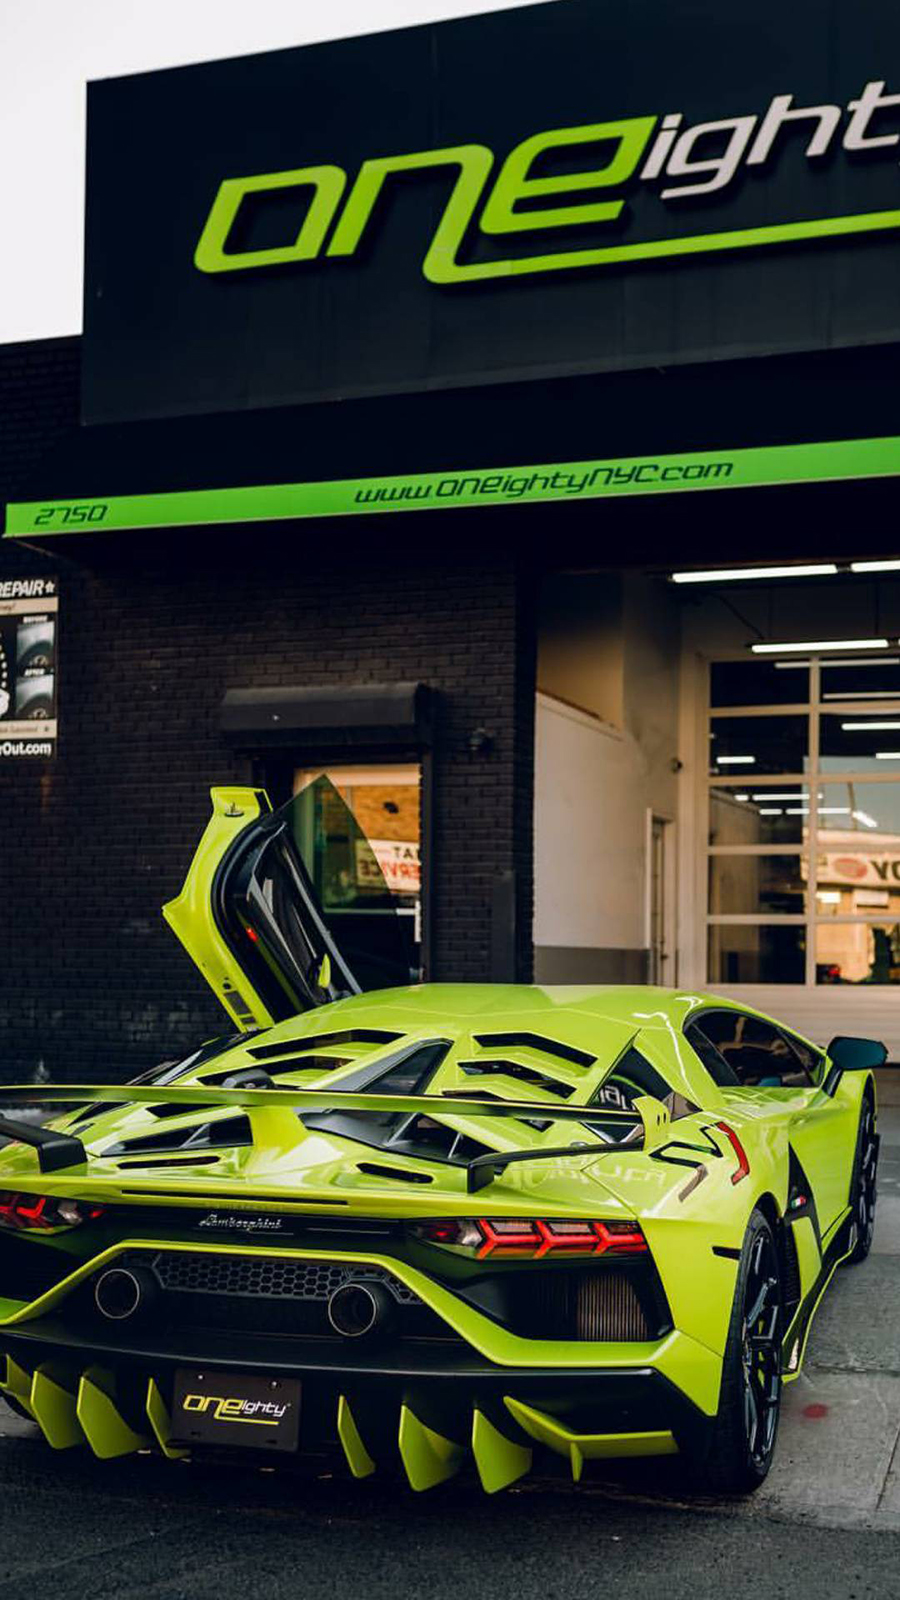 Aventador_green back view hd wallpapers download